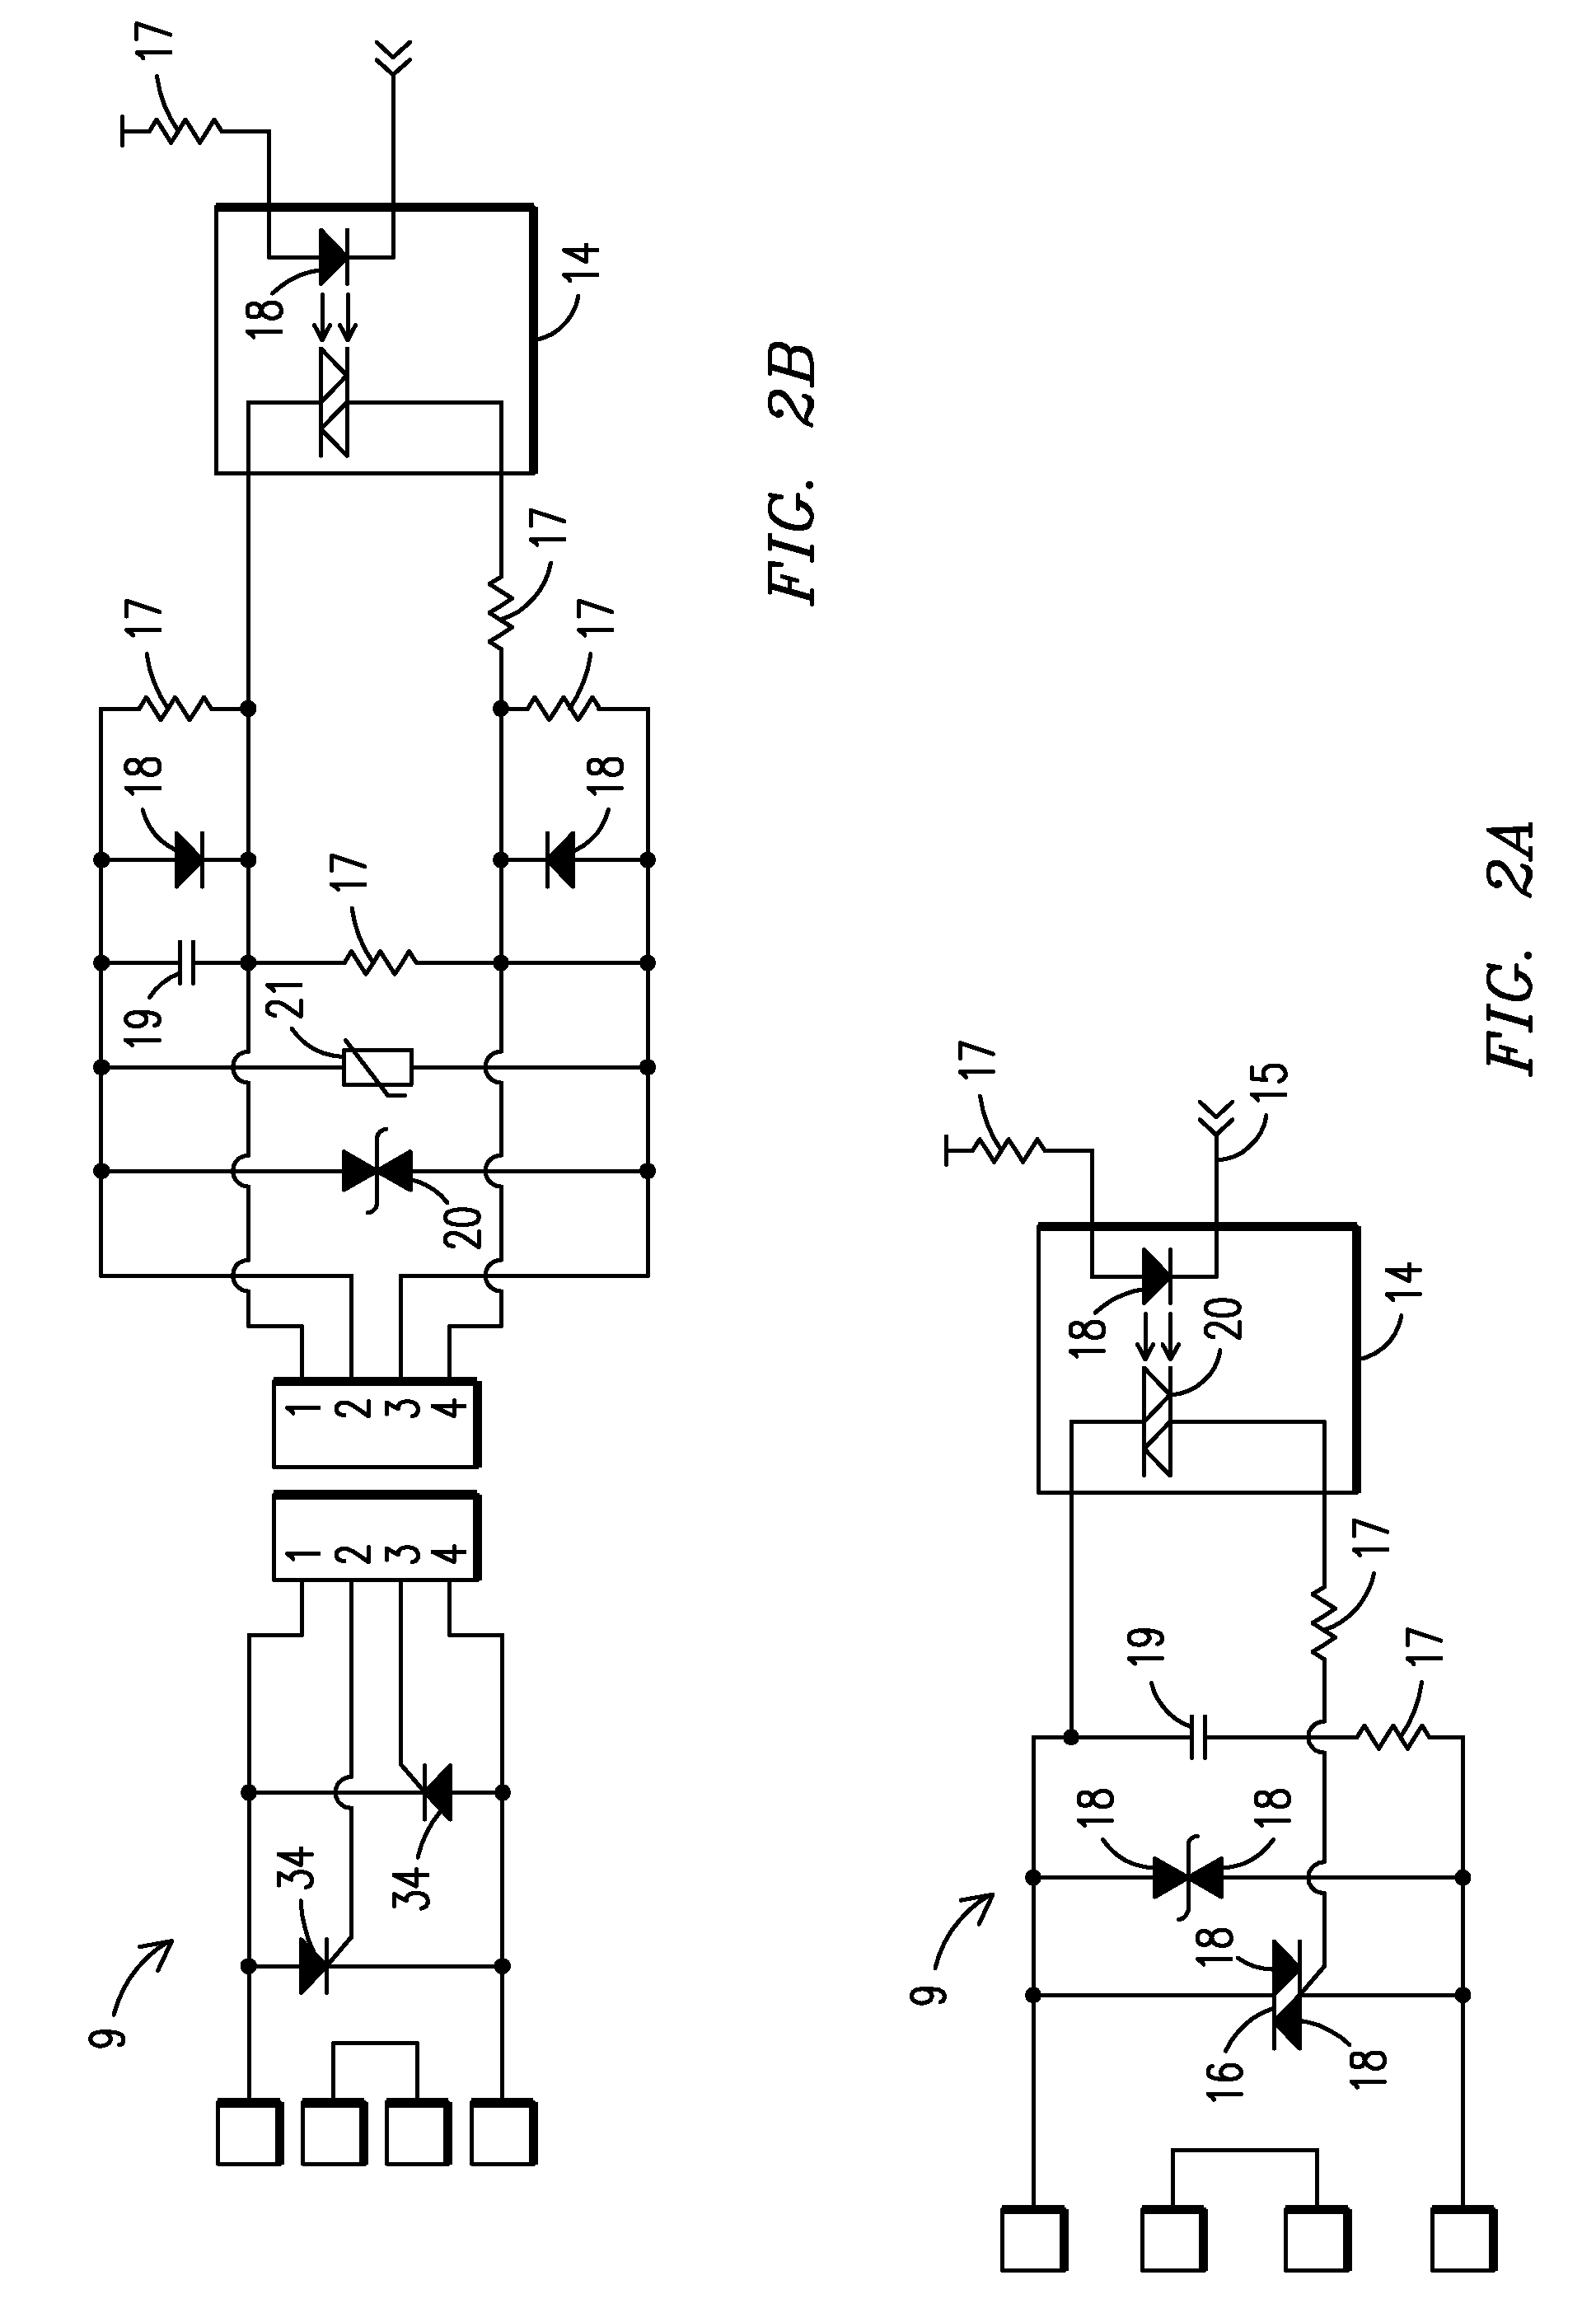 System and method for providing constant loading in ac power applications